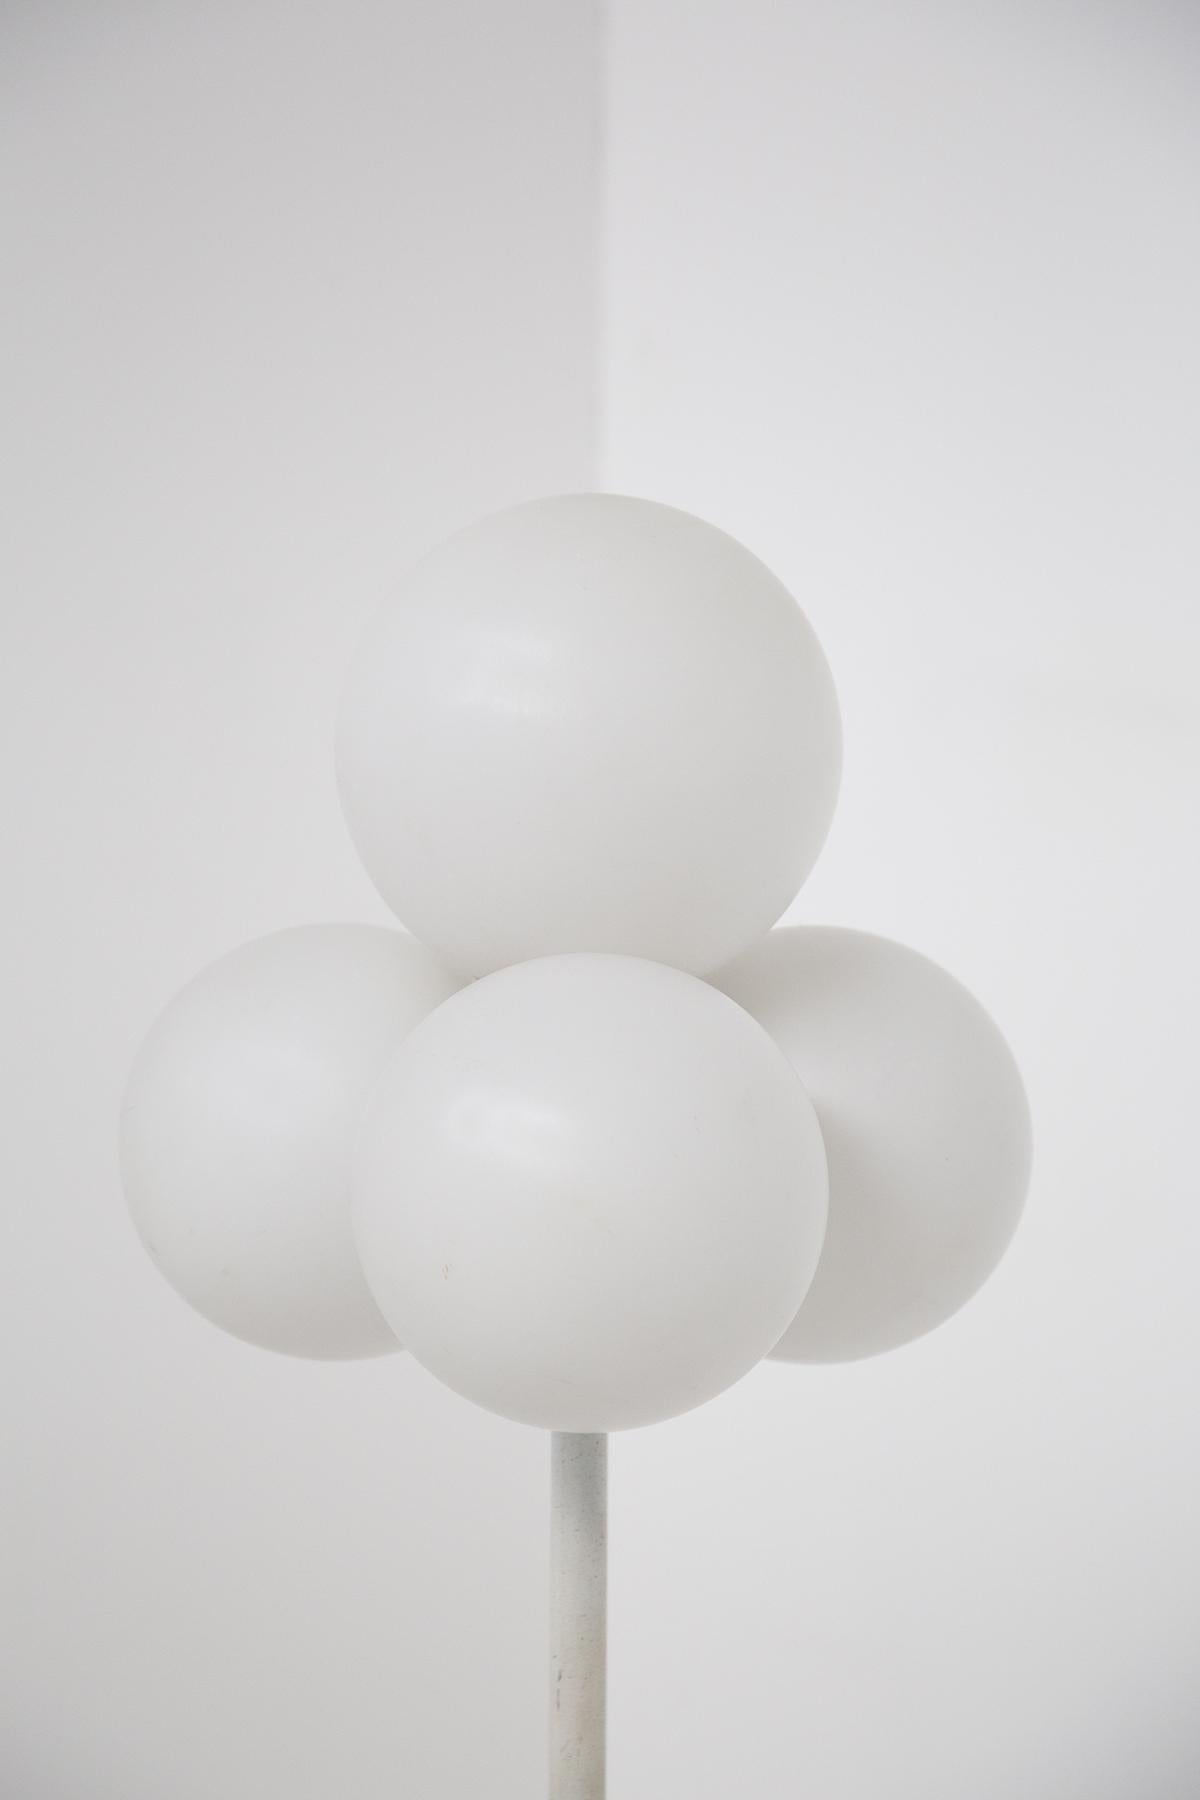 Spectacular floor lamp designed by Max Bill in the 60's, of fine Italian manufacture.
The lamp consists of a white aluminum stem, which ends with a staggered bell-shaped structure that holds the central body of the lamp. The floor lamp has a round